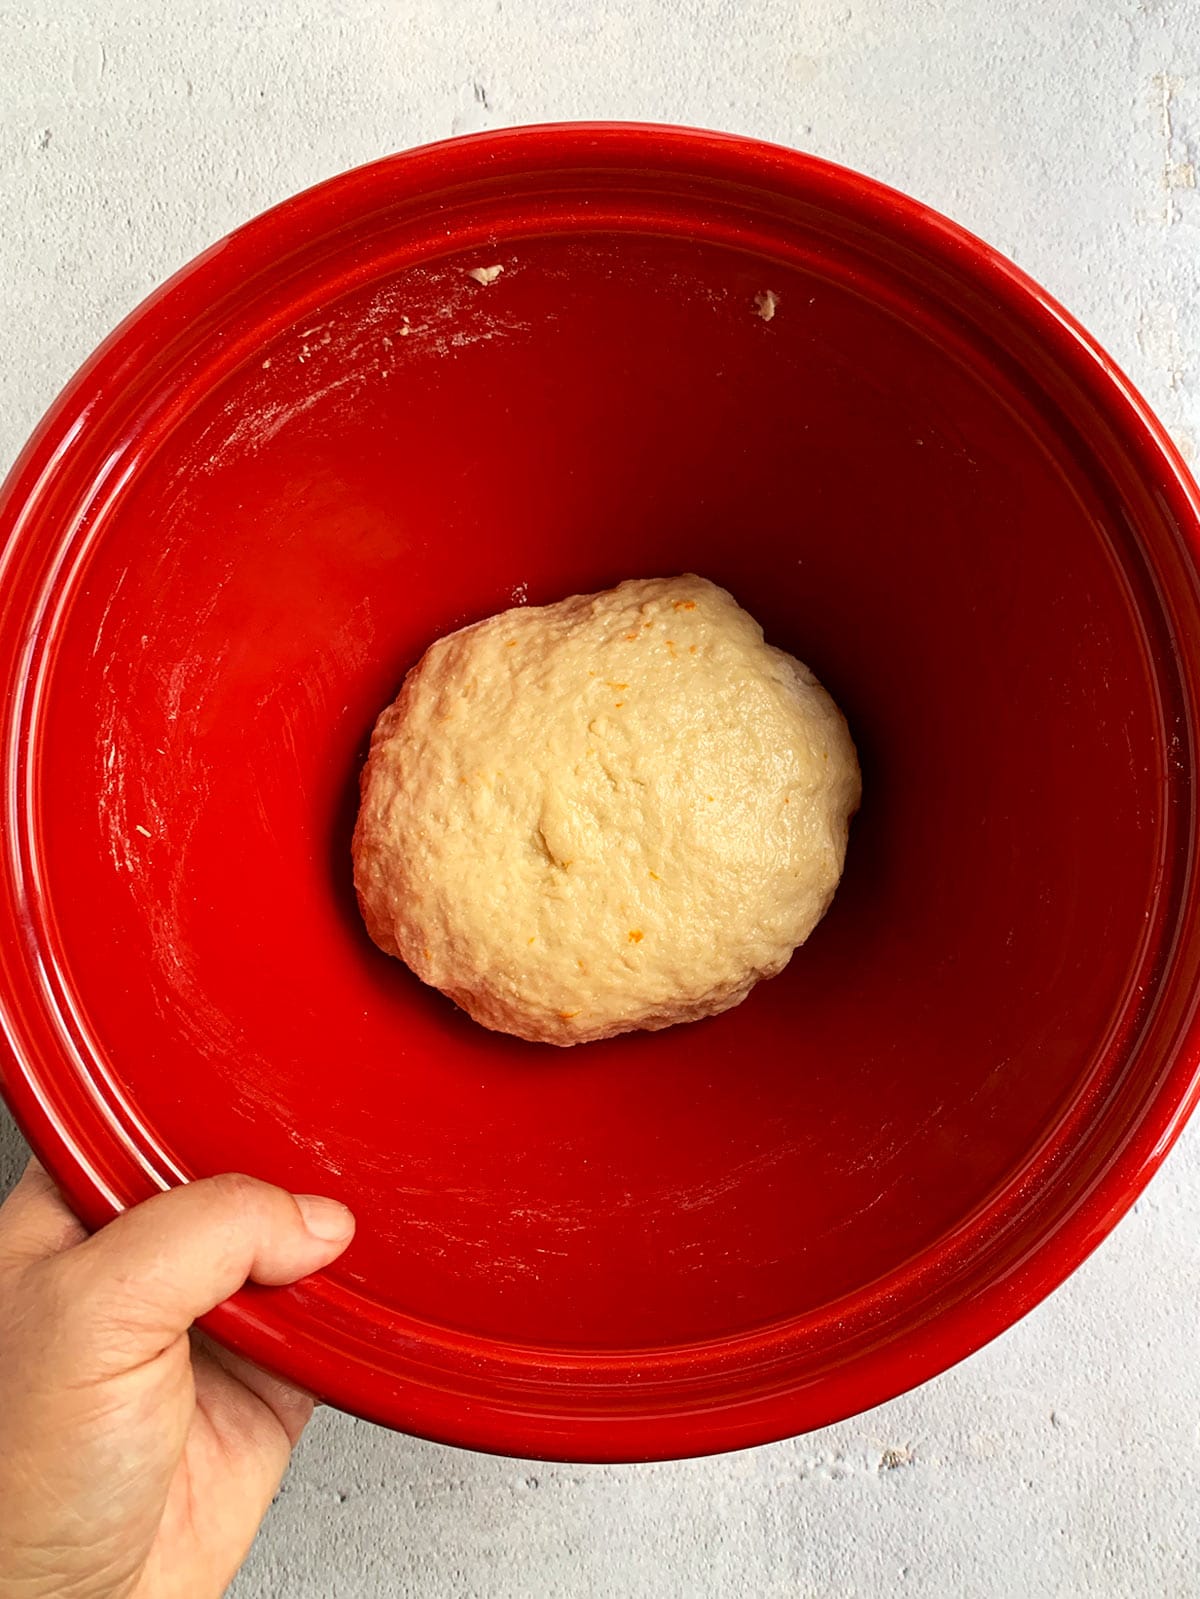 Donut dough ready to rise in a red bowl.